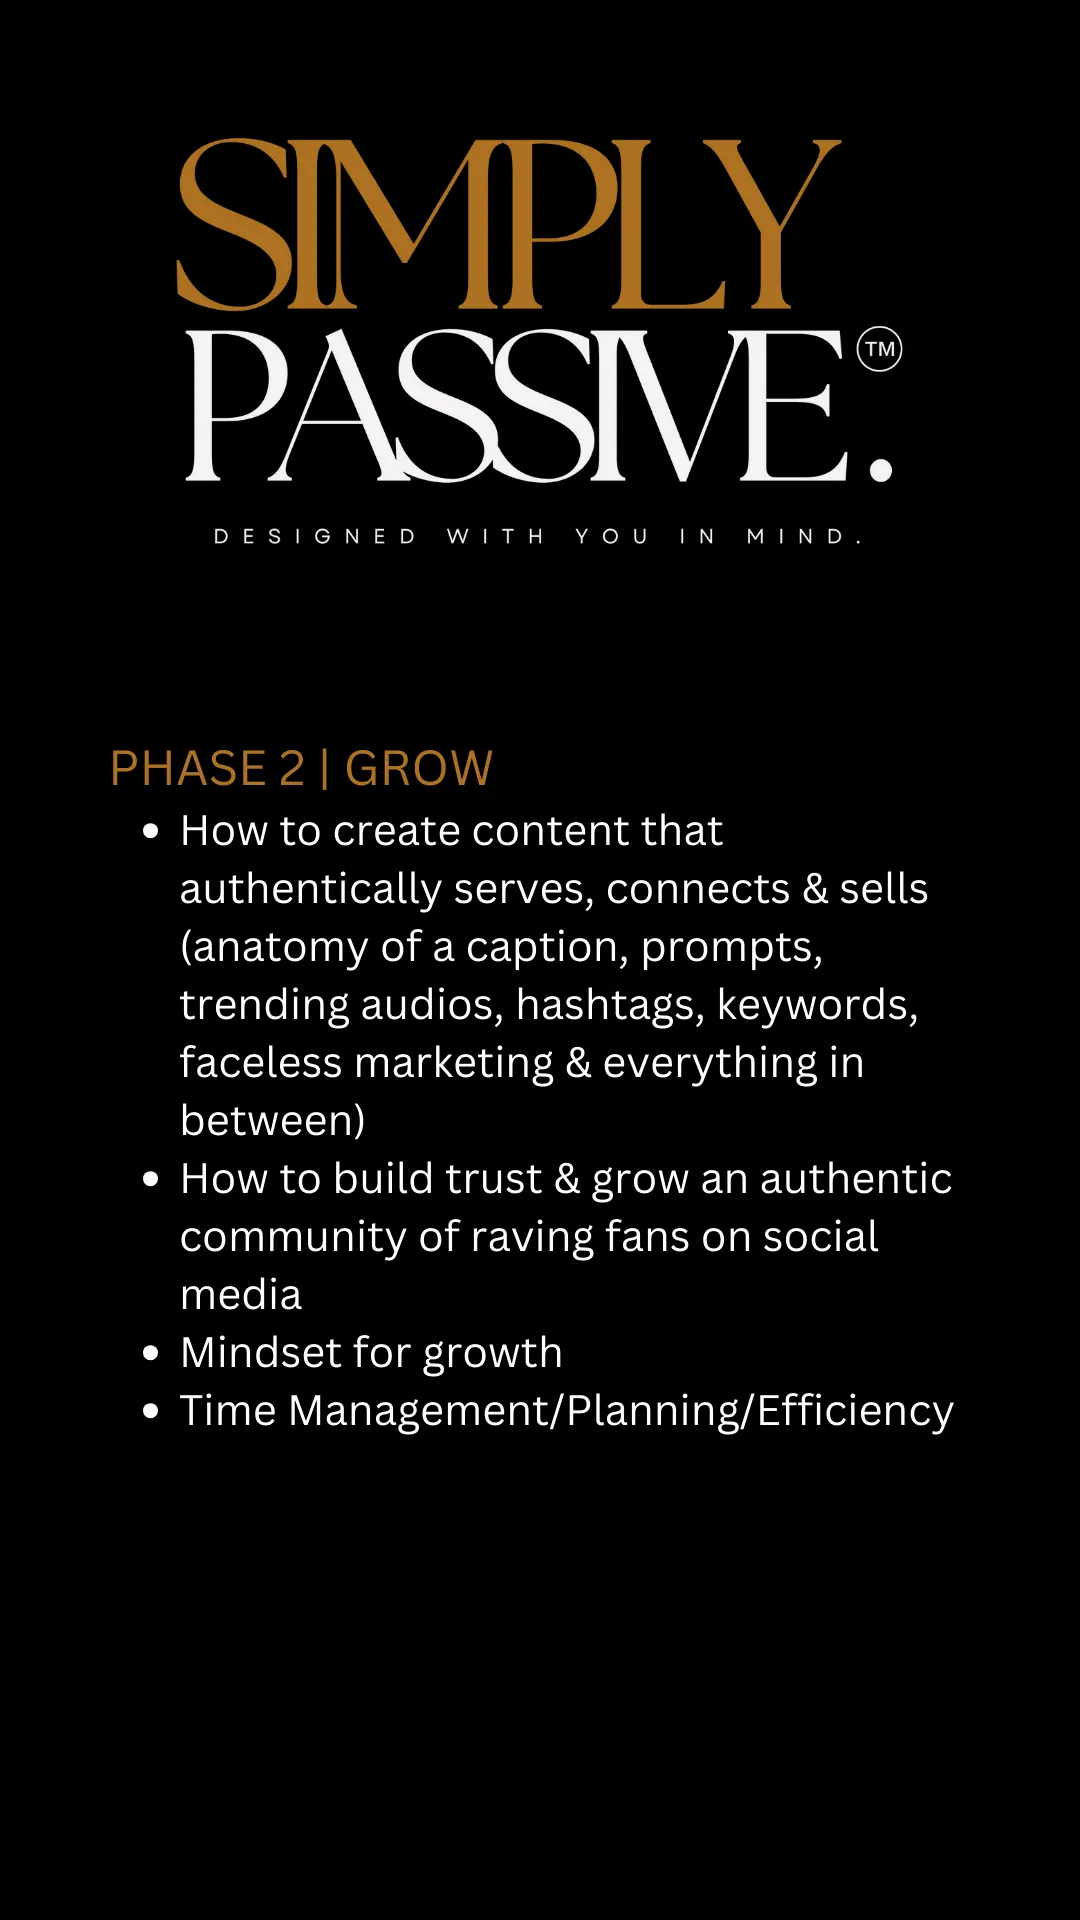 Simply Passive Phase 2